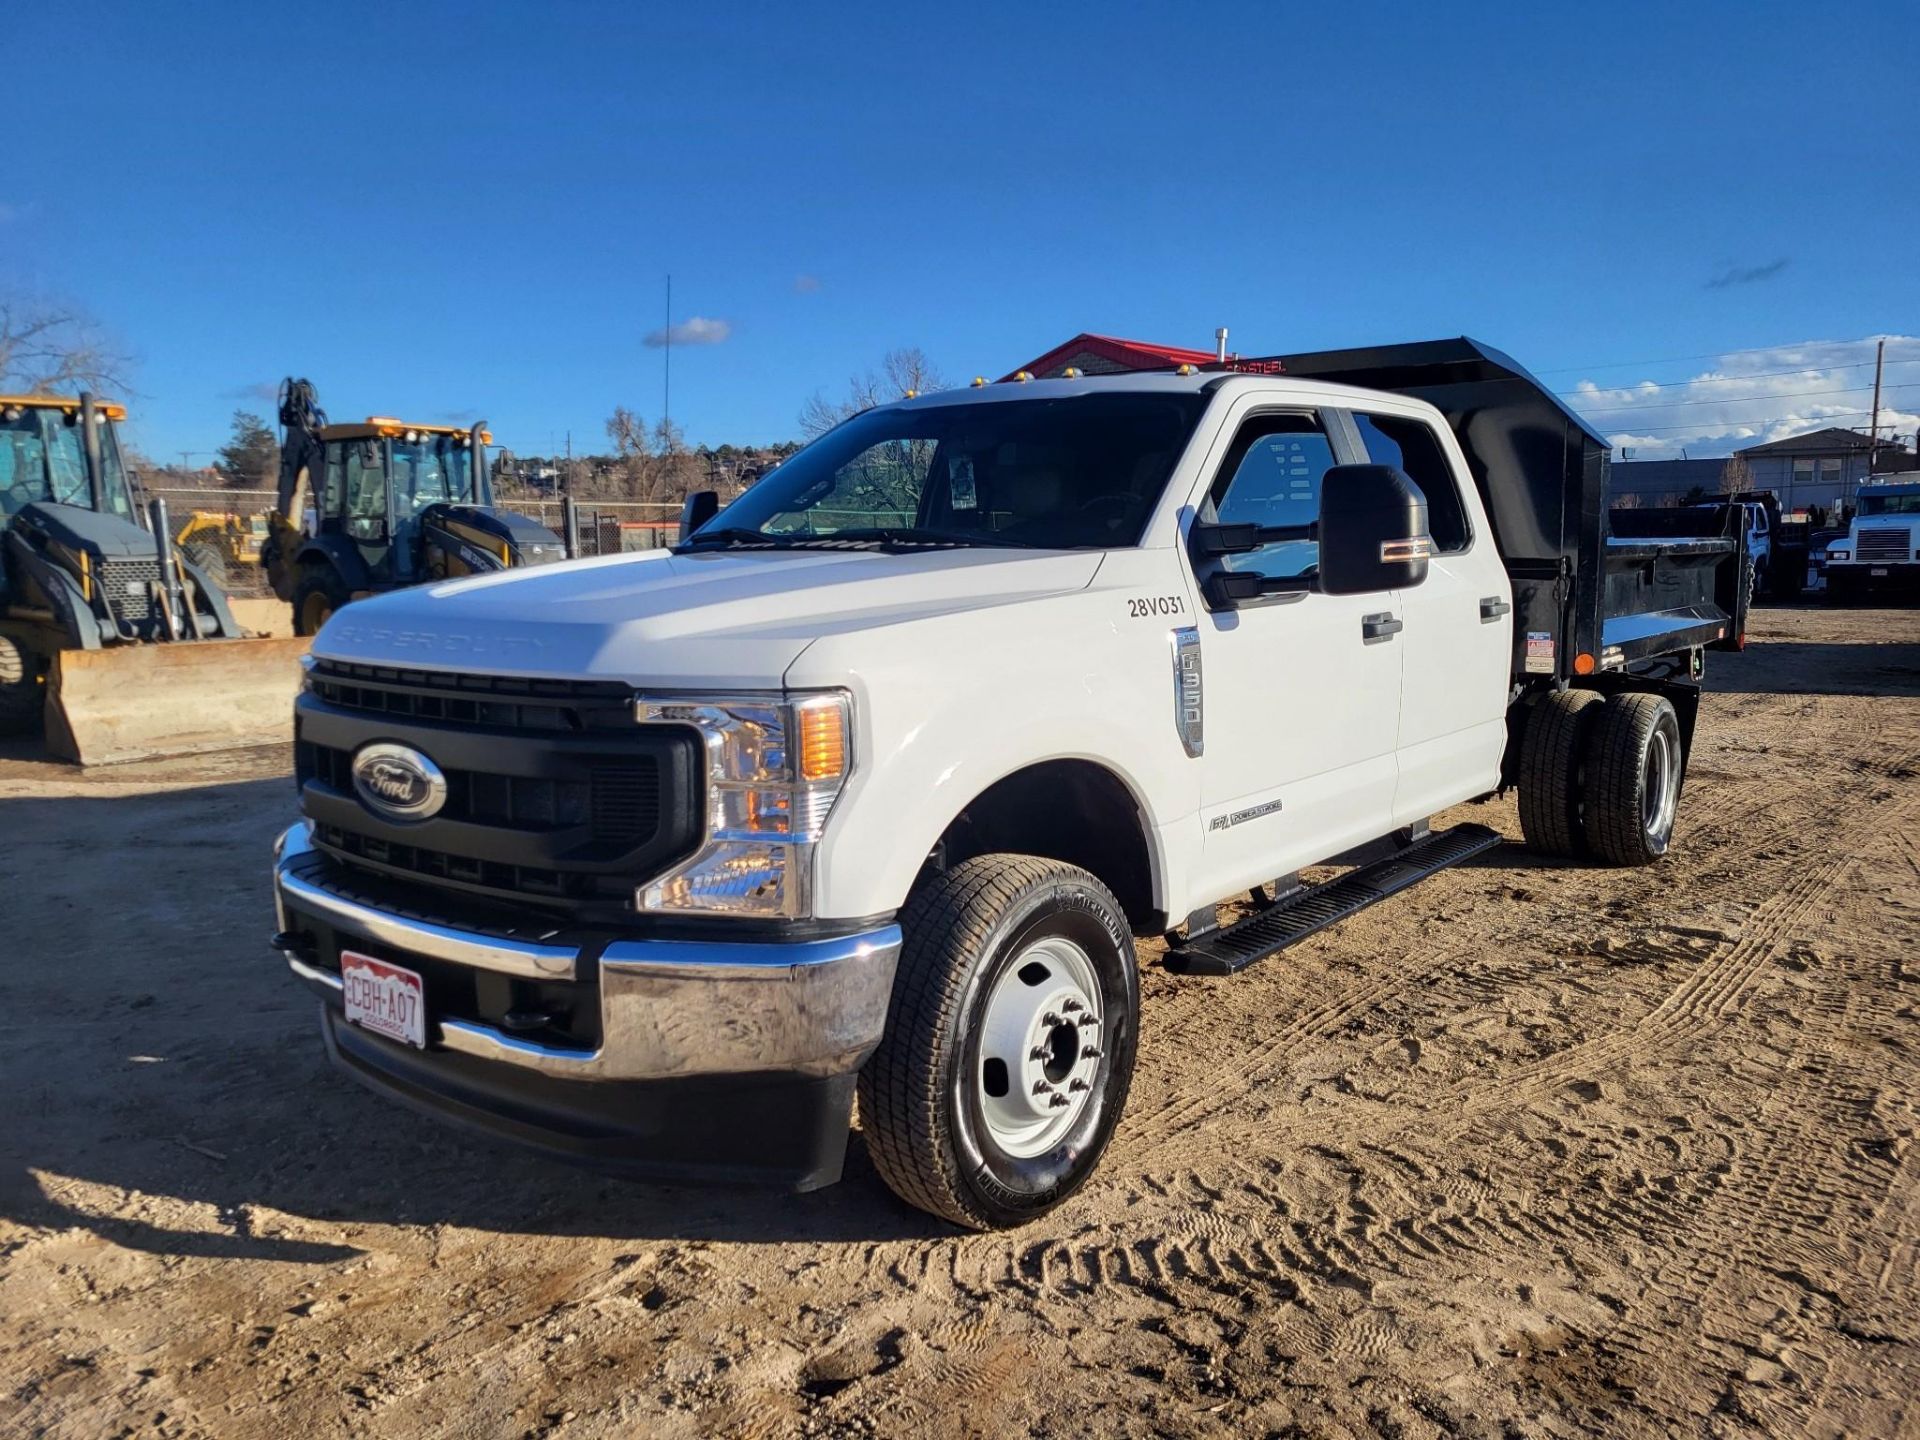 2021 FORD F350 CREW CAB DUALLY DIESEL FLATBED DUMP TRUCK 19,500 MILES!